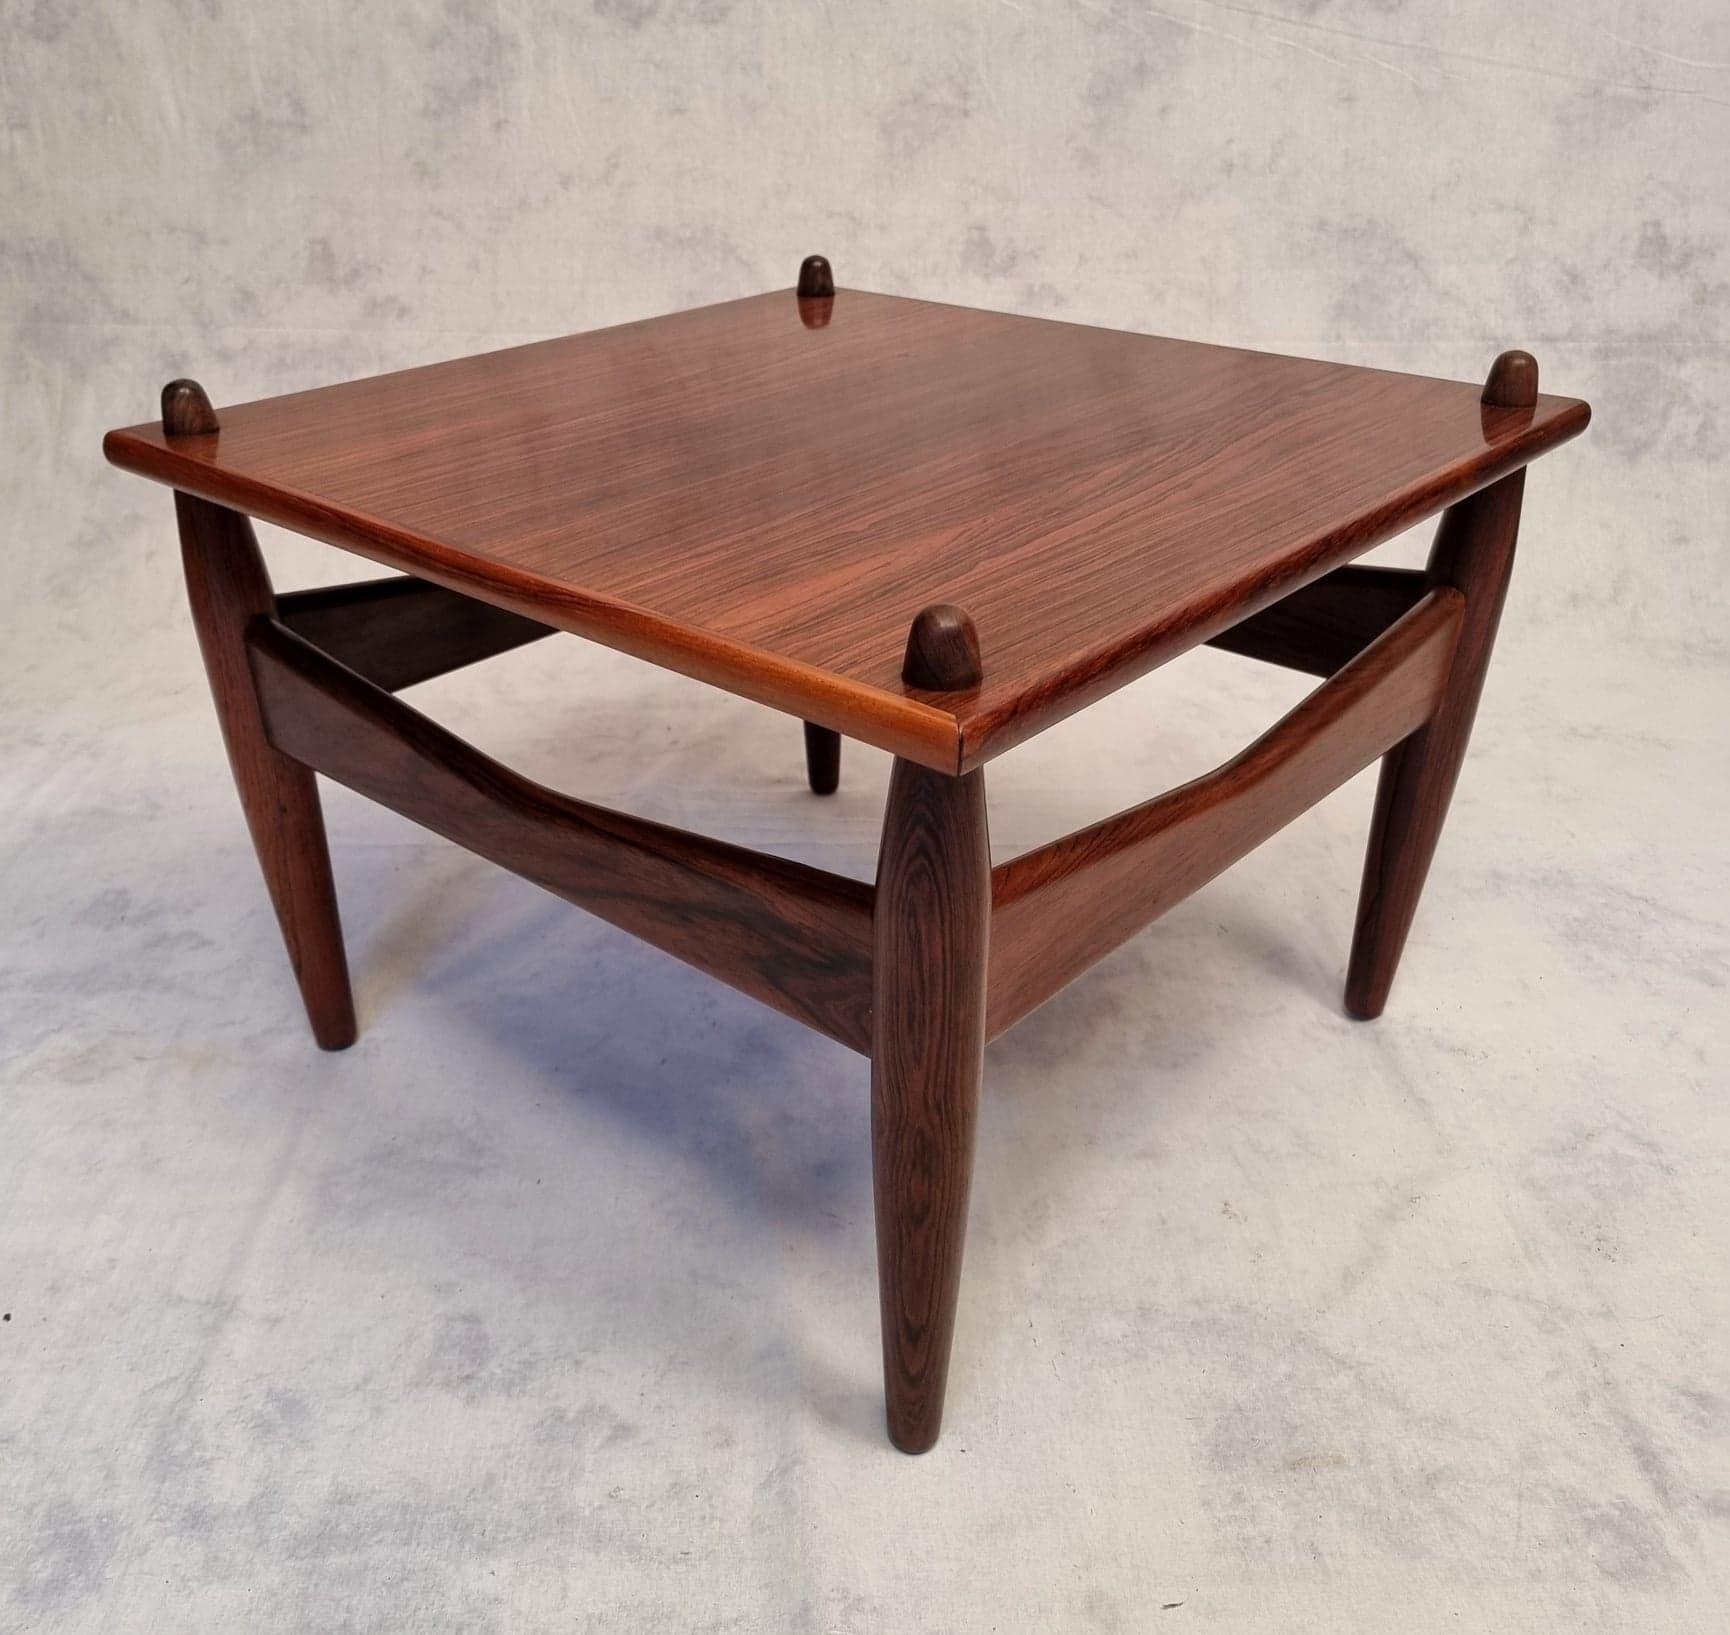 Mid-20th Century Pair Of Side Tables By Illum Wikkelsø – N°272, Rosewood, Ca 1950 For Sale